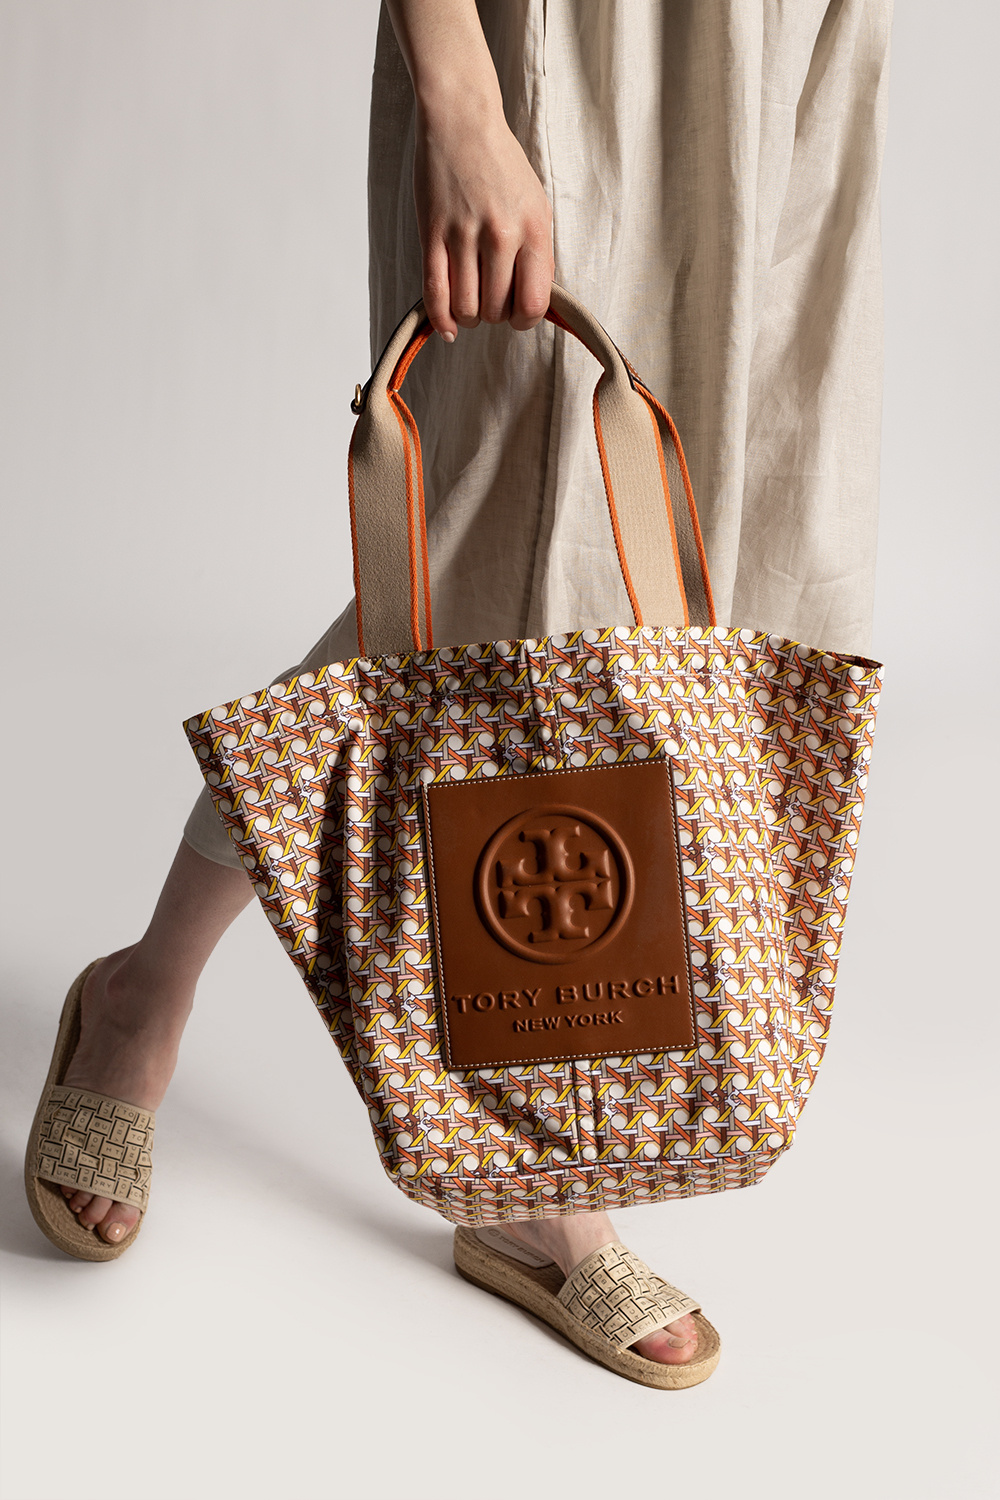 Tory Burch collaboration bag with logo | spynea backpack with logo diesel  backpack spynea | IetpShops | Women's marcelo Bags